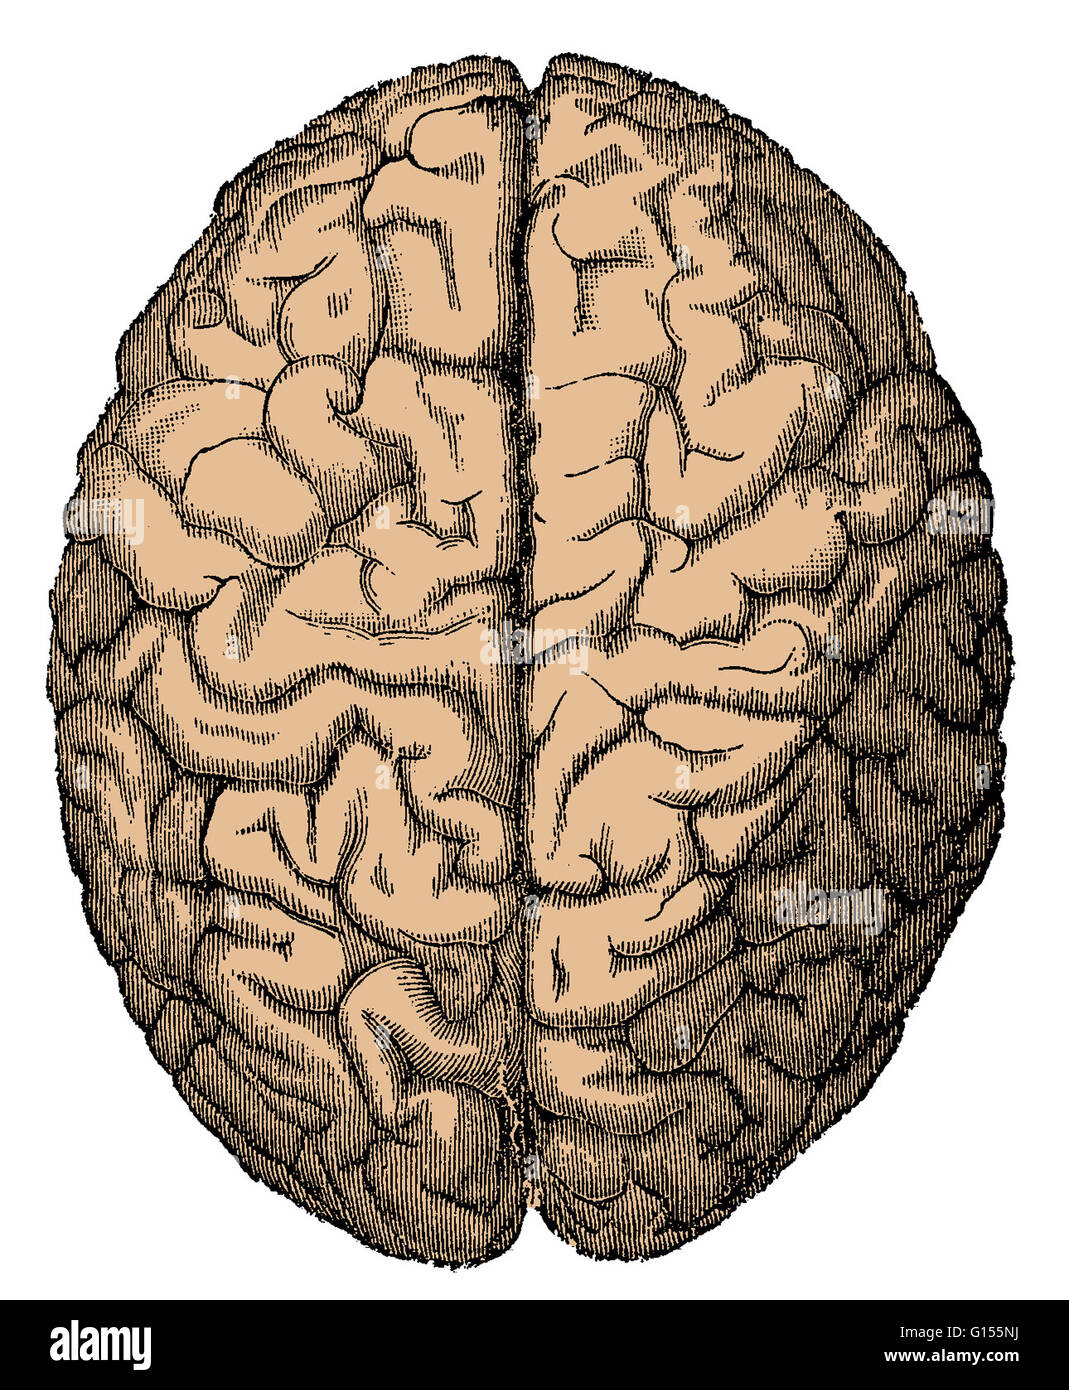 Color enhanced illustration of the brain viewed from the top. Stock Photo